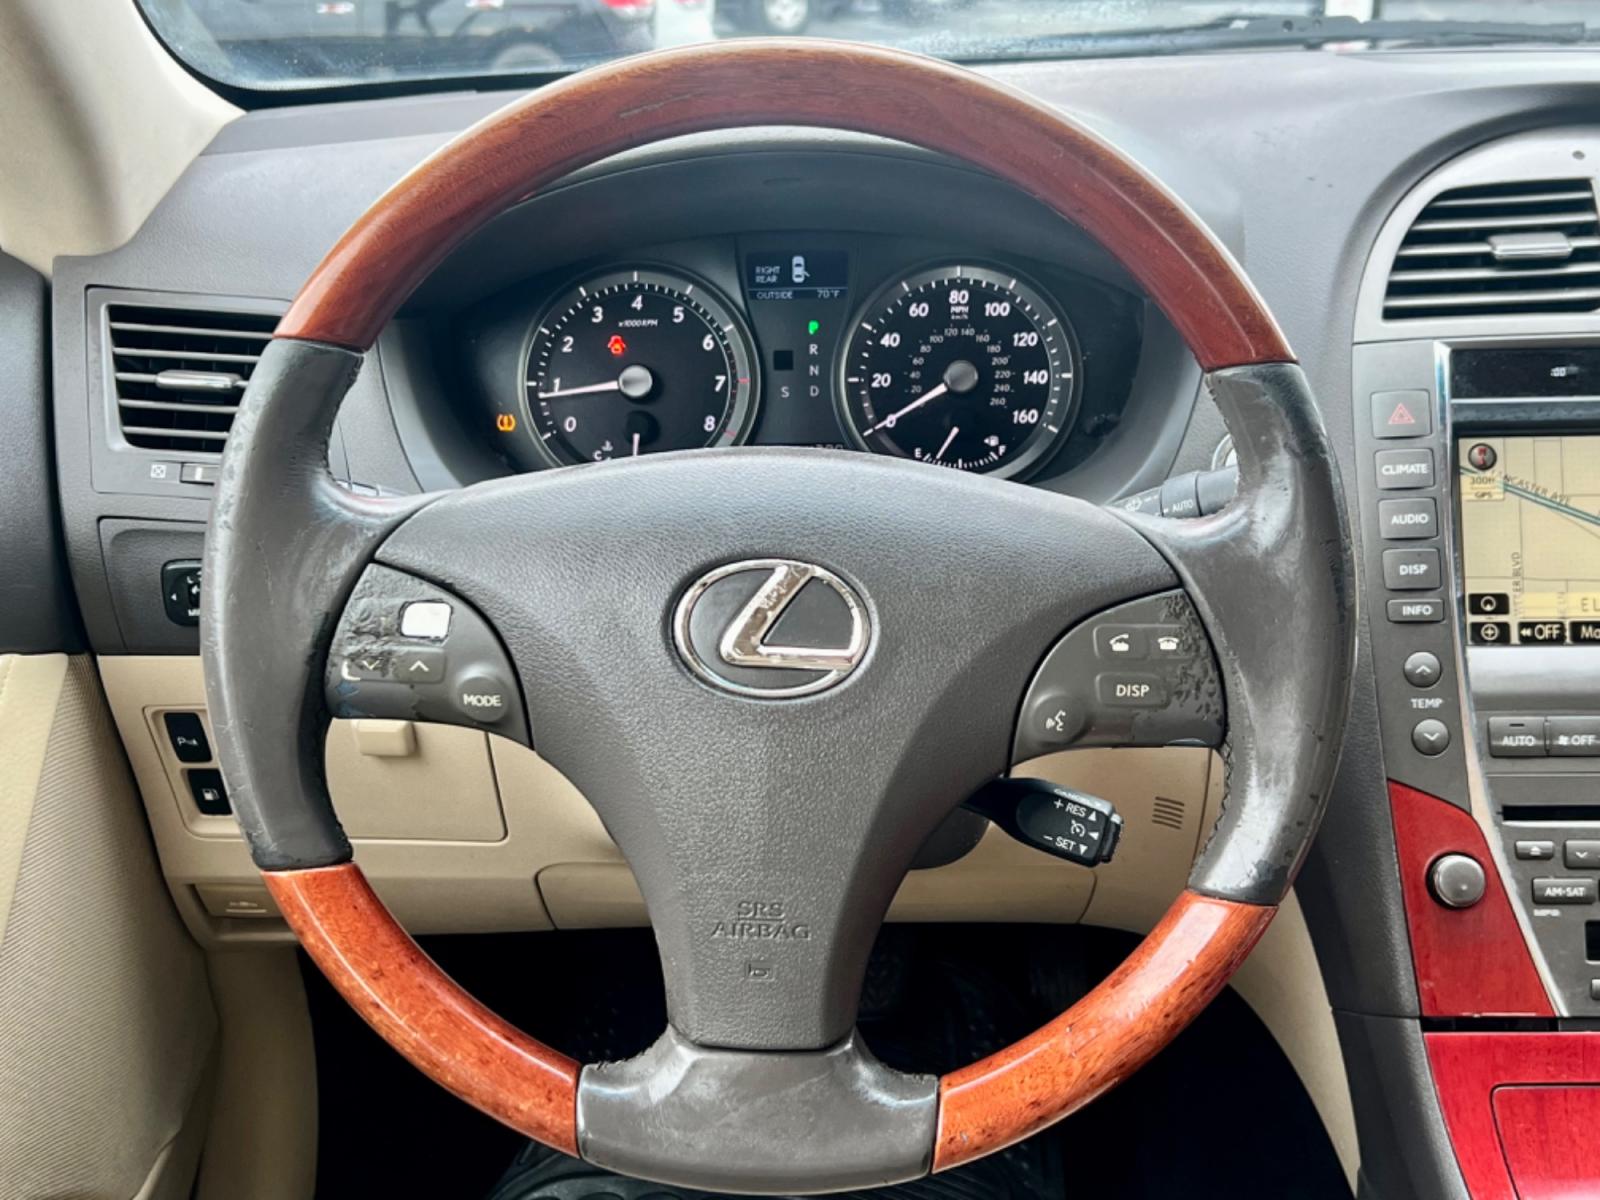 2008 BLUE LEXUS ES 350 (JTHBJ46G682) , located at 5900 E. Lancaster Ave., Fort Worth, TX, 76112, (817) 457-5456, 0.000000, 0.000000 - This is a 2008 LEXUS ES350 LUXURY 4 DR SEDAN that is in excellent condition. The interior is clean with no rips or tears or stains. All power windows, door locks and seats. Ice cold AC for those hot Texas summer days. It is equipped with a CD player, AM/FM radio. It runs and drives like new. The tir - Photo #21